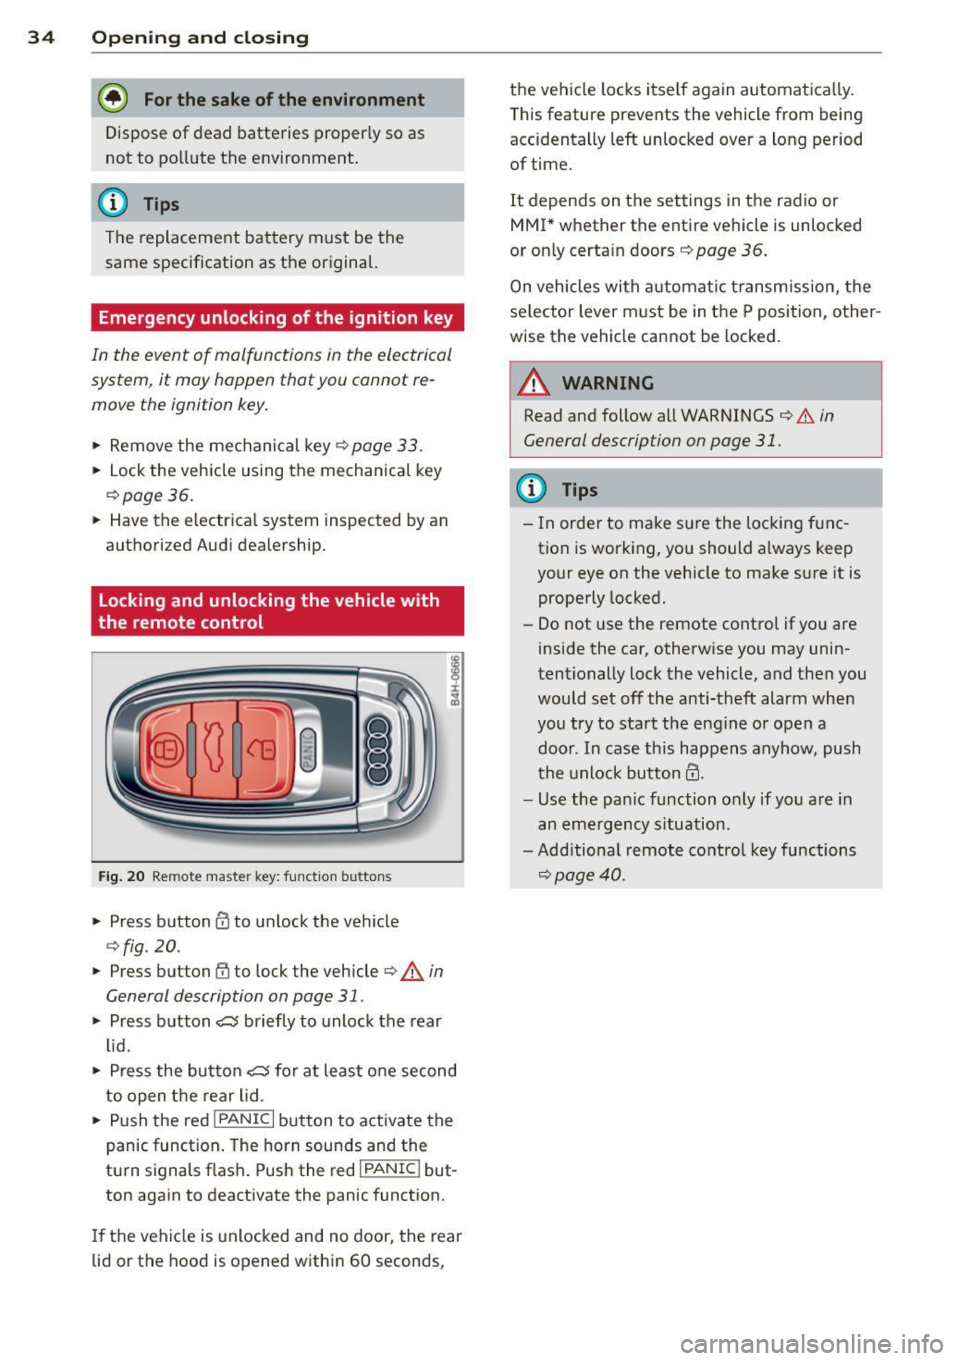 AUDI A5 CABRIOLET 2013  Owners Manual 34  Openin g and  clo sing 
@ For the  sake of the  environment 
Dispose  of  dead  batteries  proper ly so  as 
not  to  pollute  the  environment. 
@ Tips 
The  replacement  battery  must  be  the 
